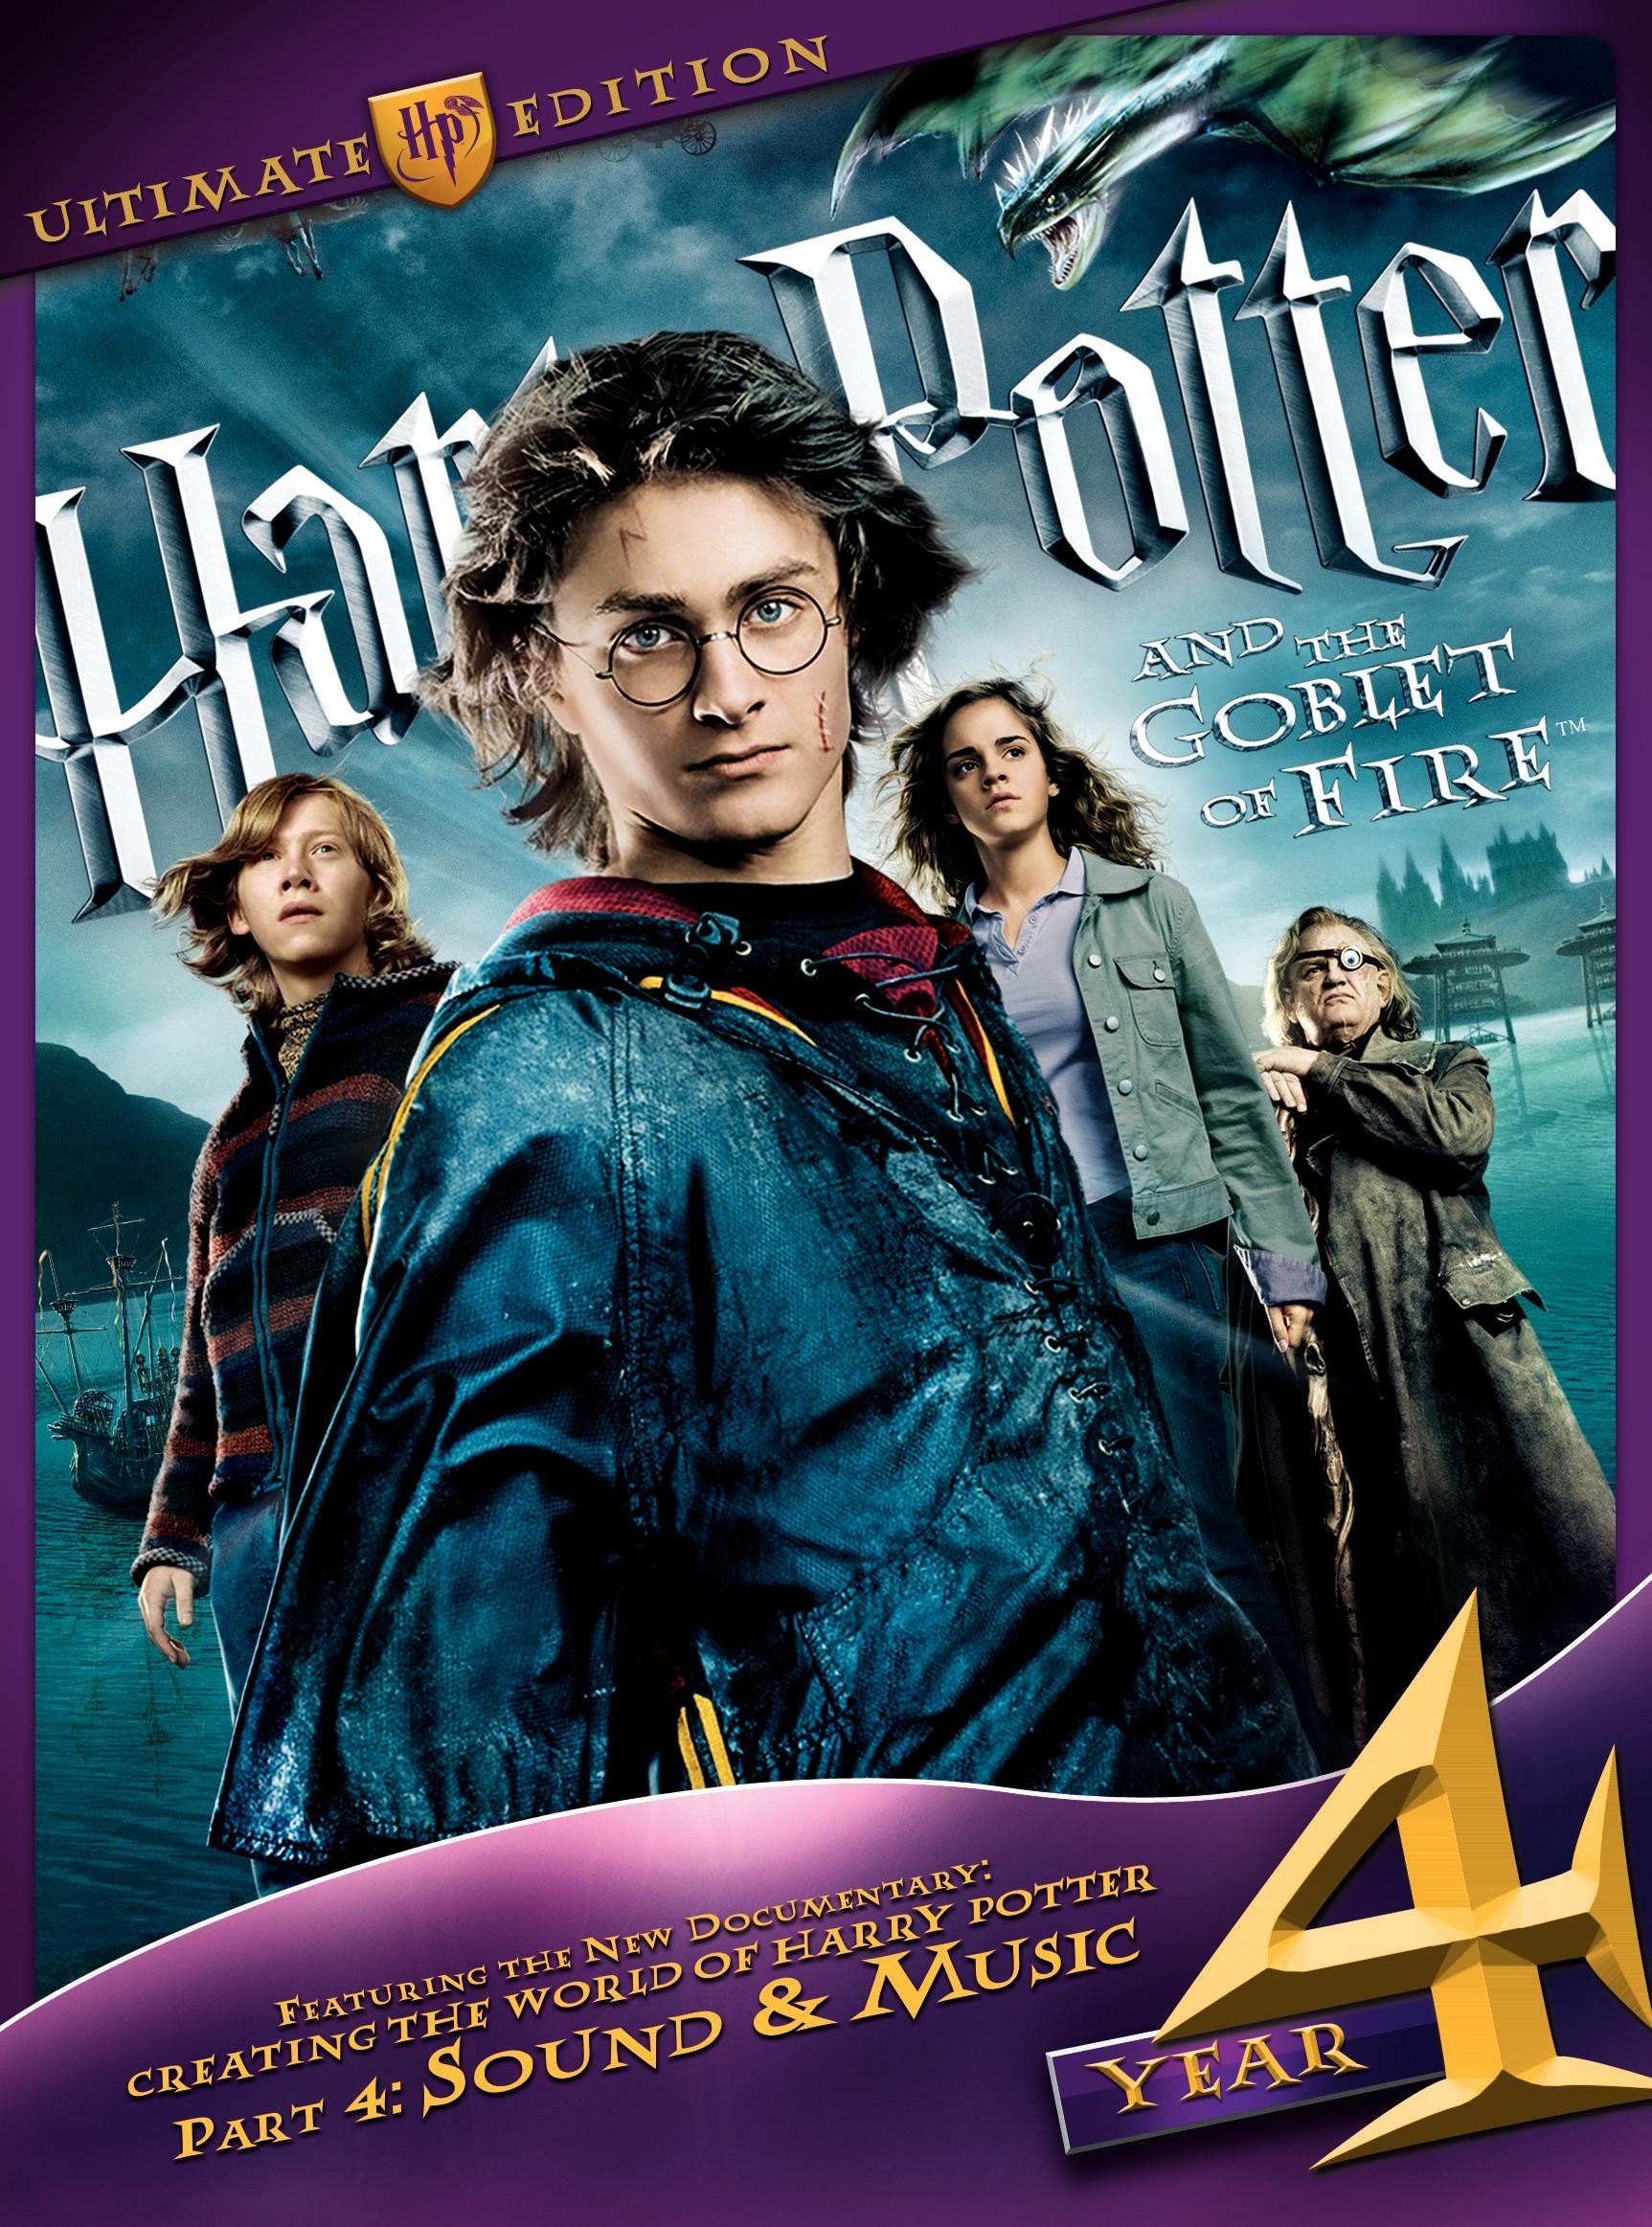 Harry Potter and the Goblet of Fire DVD Release Date March 7, 2006